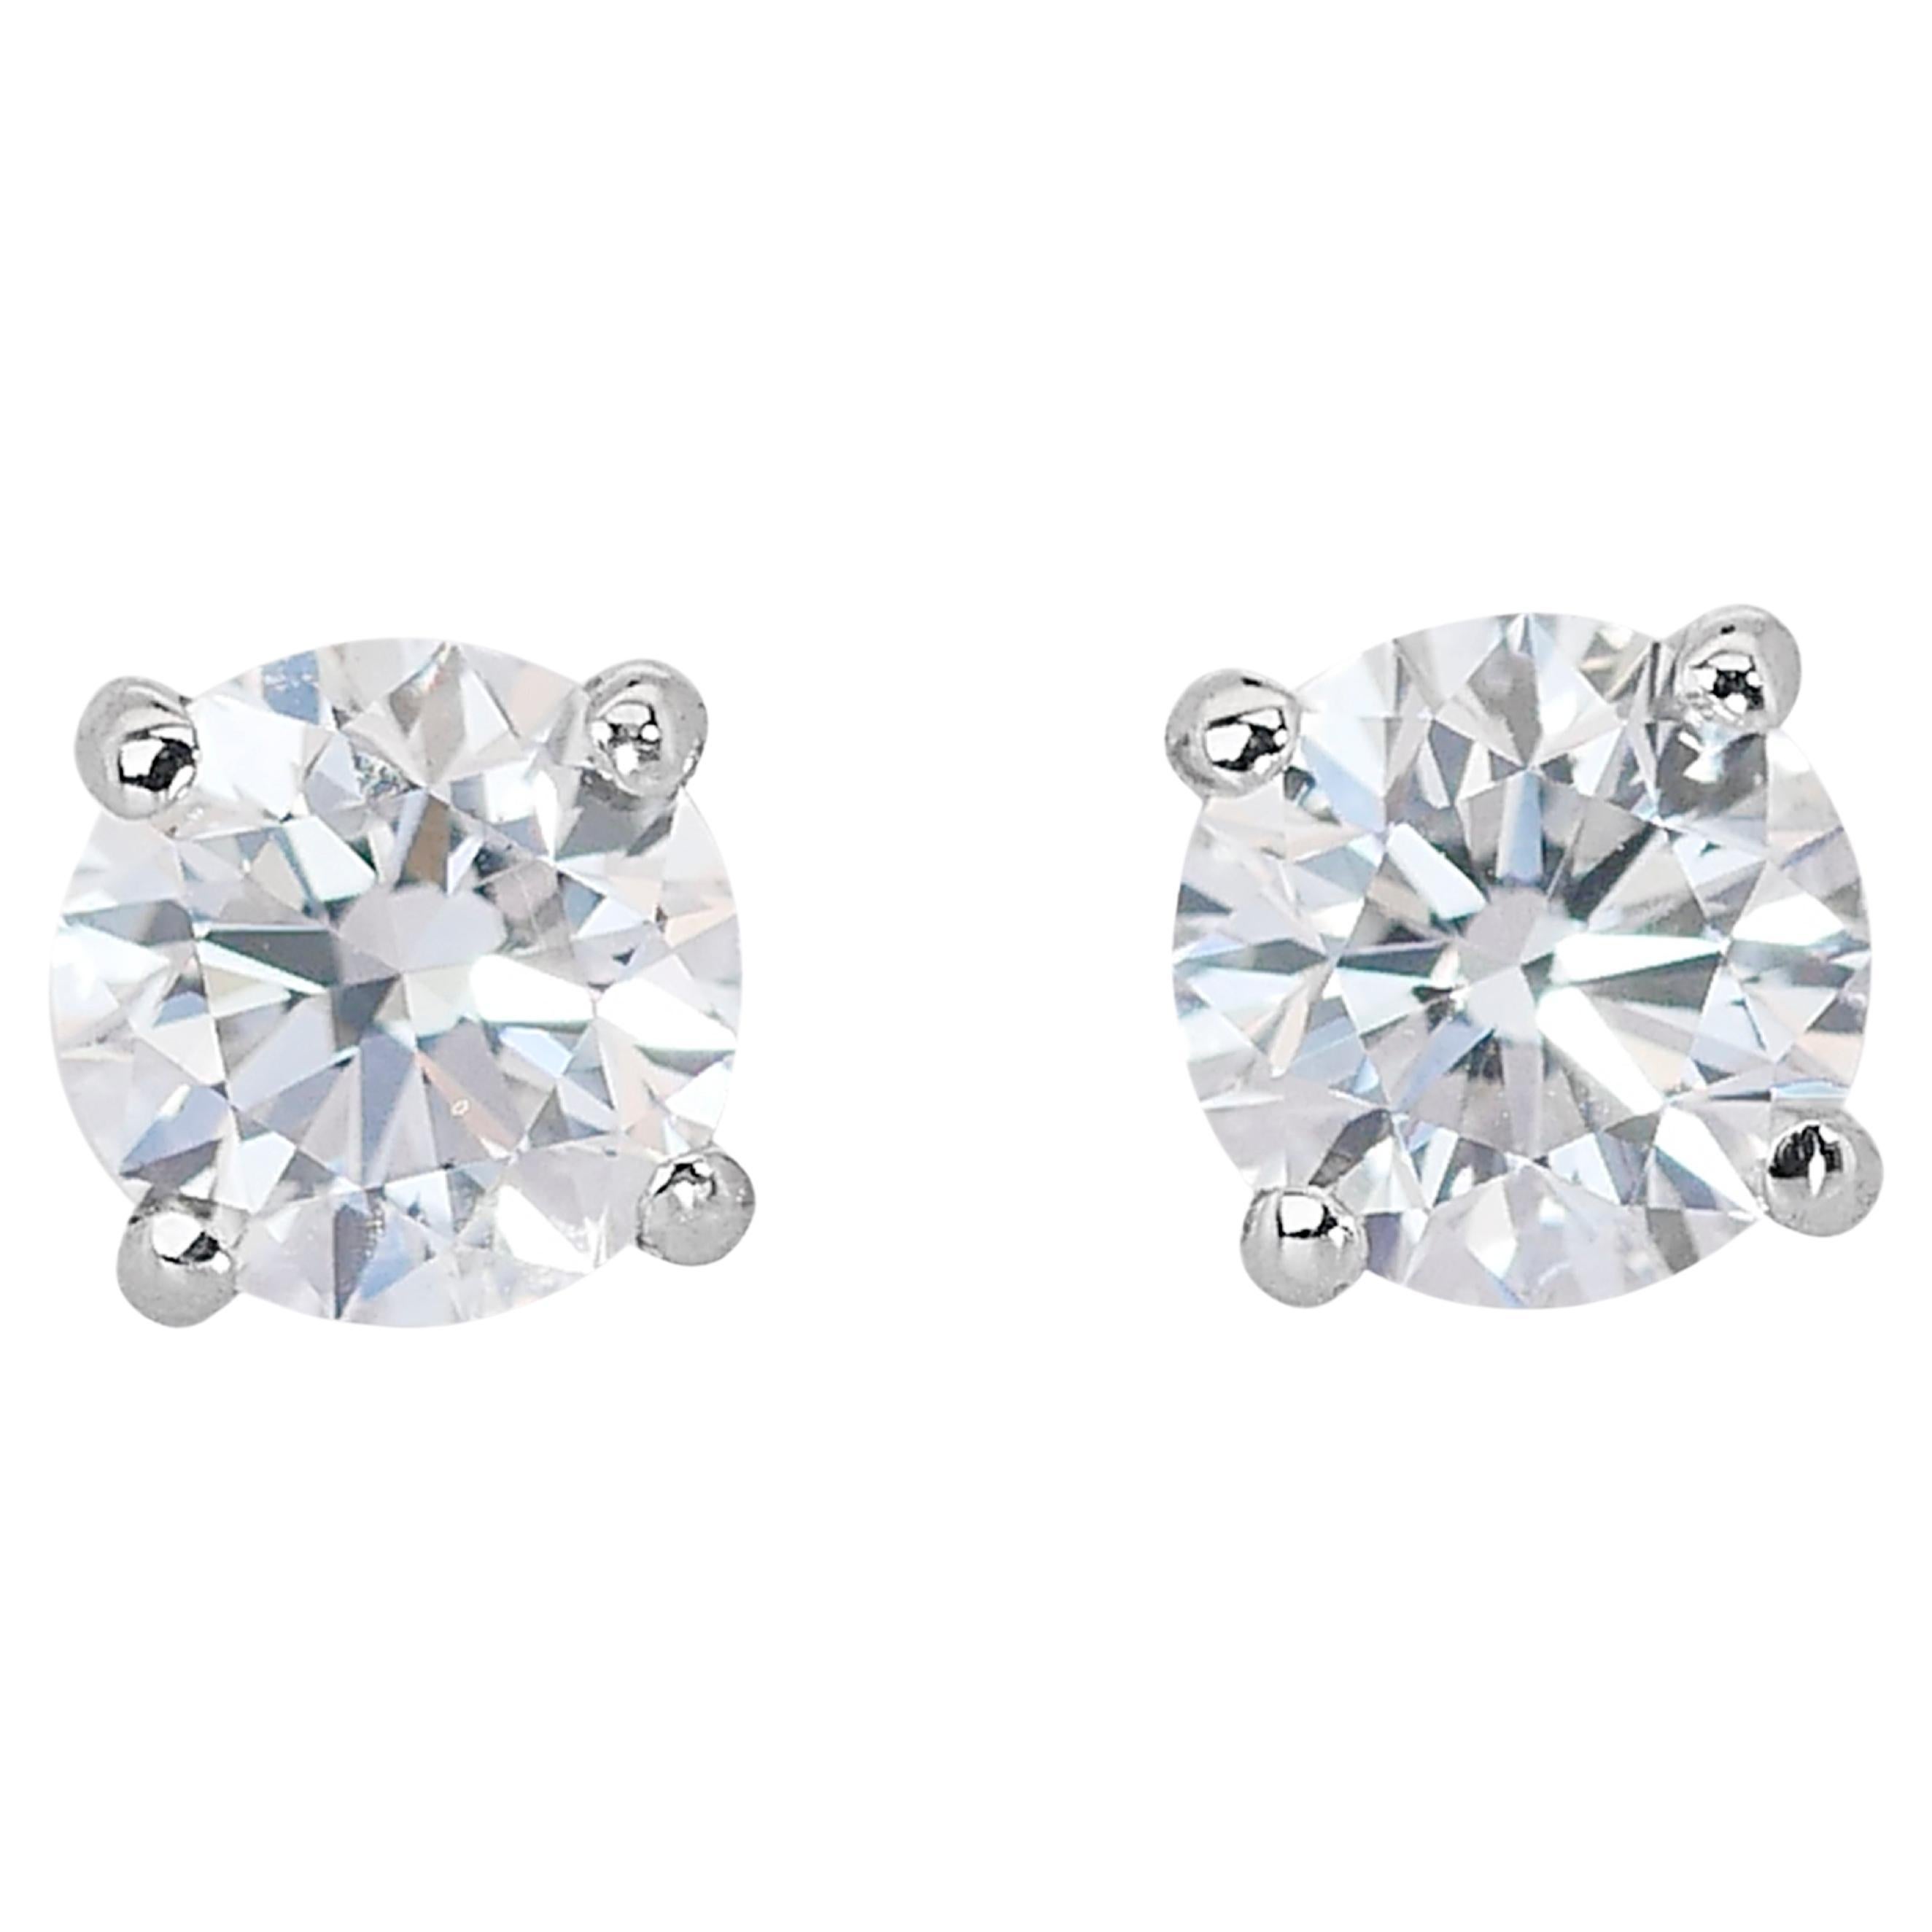 Gleaming 18K White Gold Diamond Stud Earrings with 1.8ct- GIA Certified For Sale